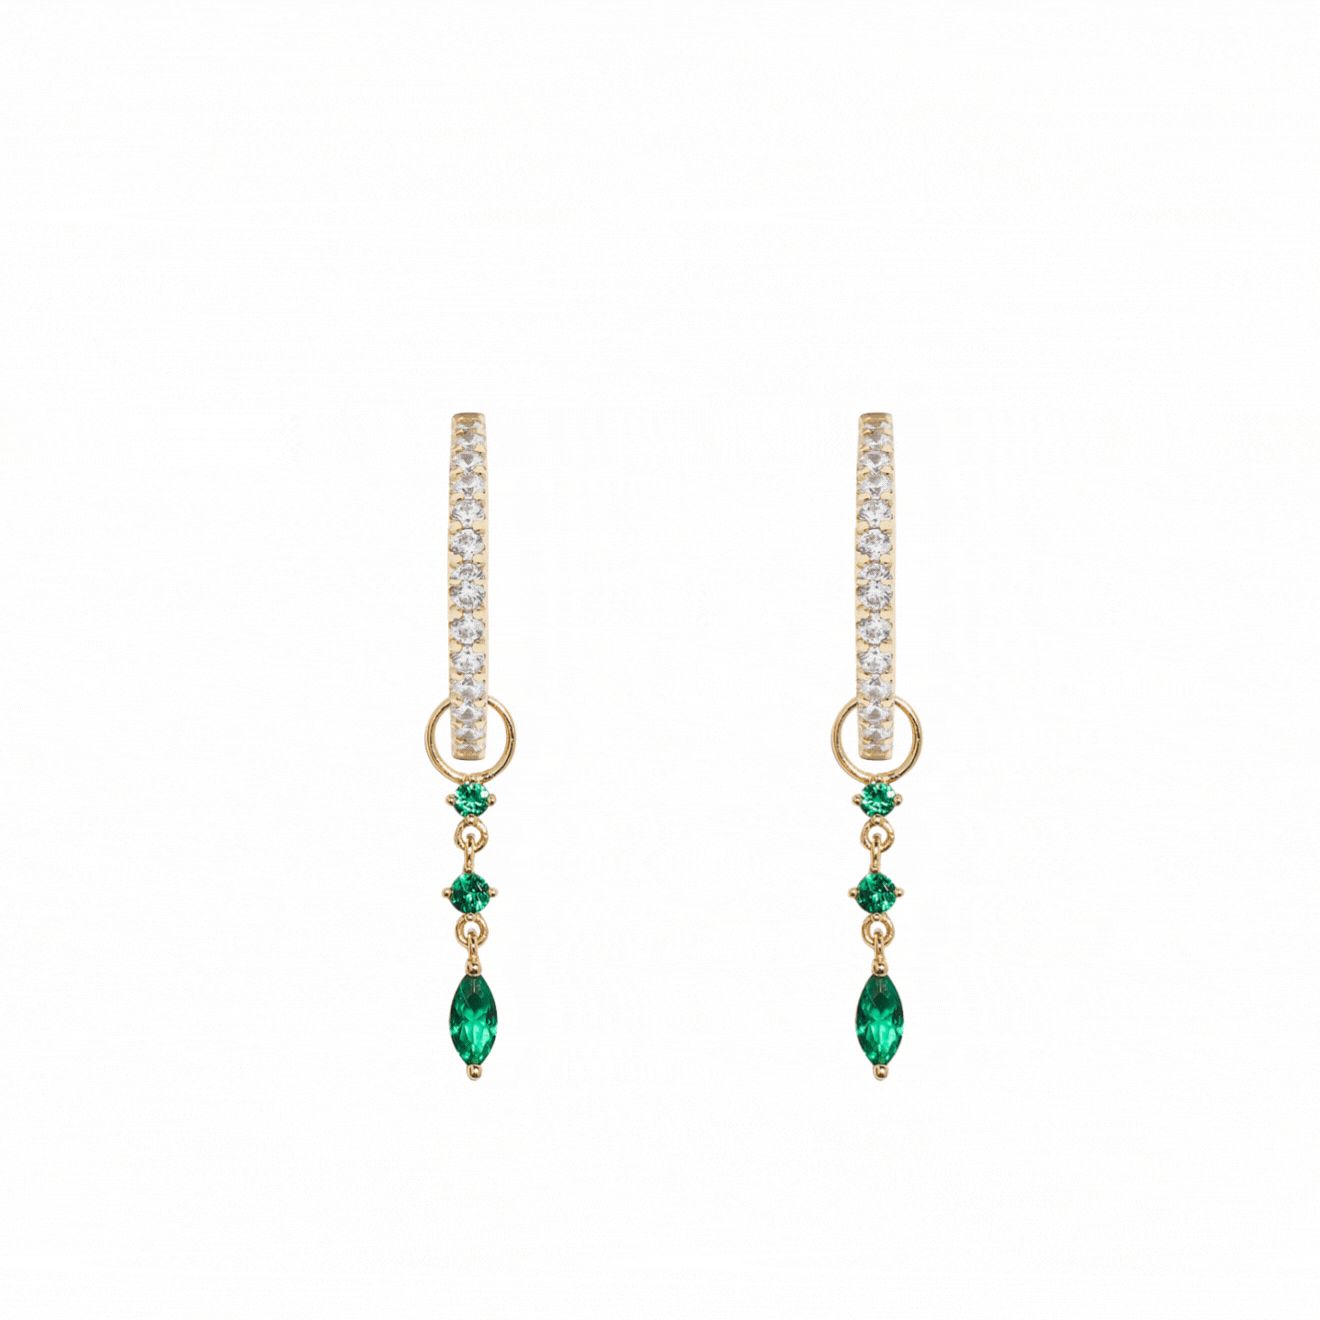 Juno earrings | Five And Two Jewelry